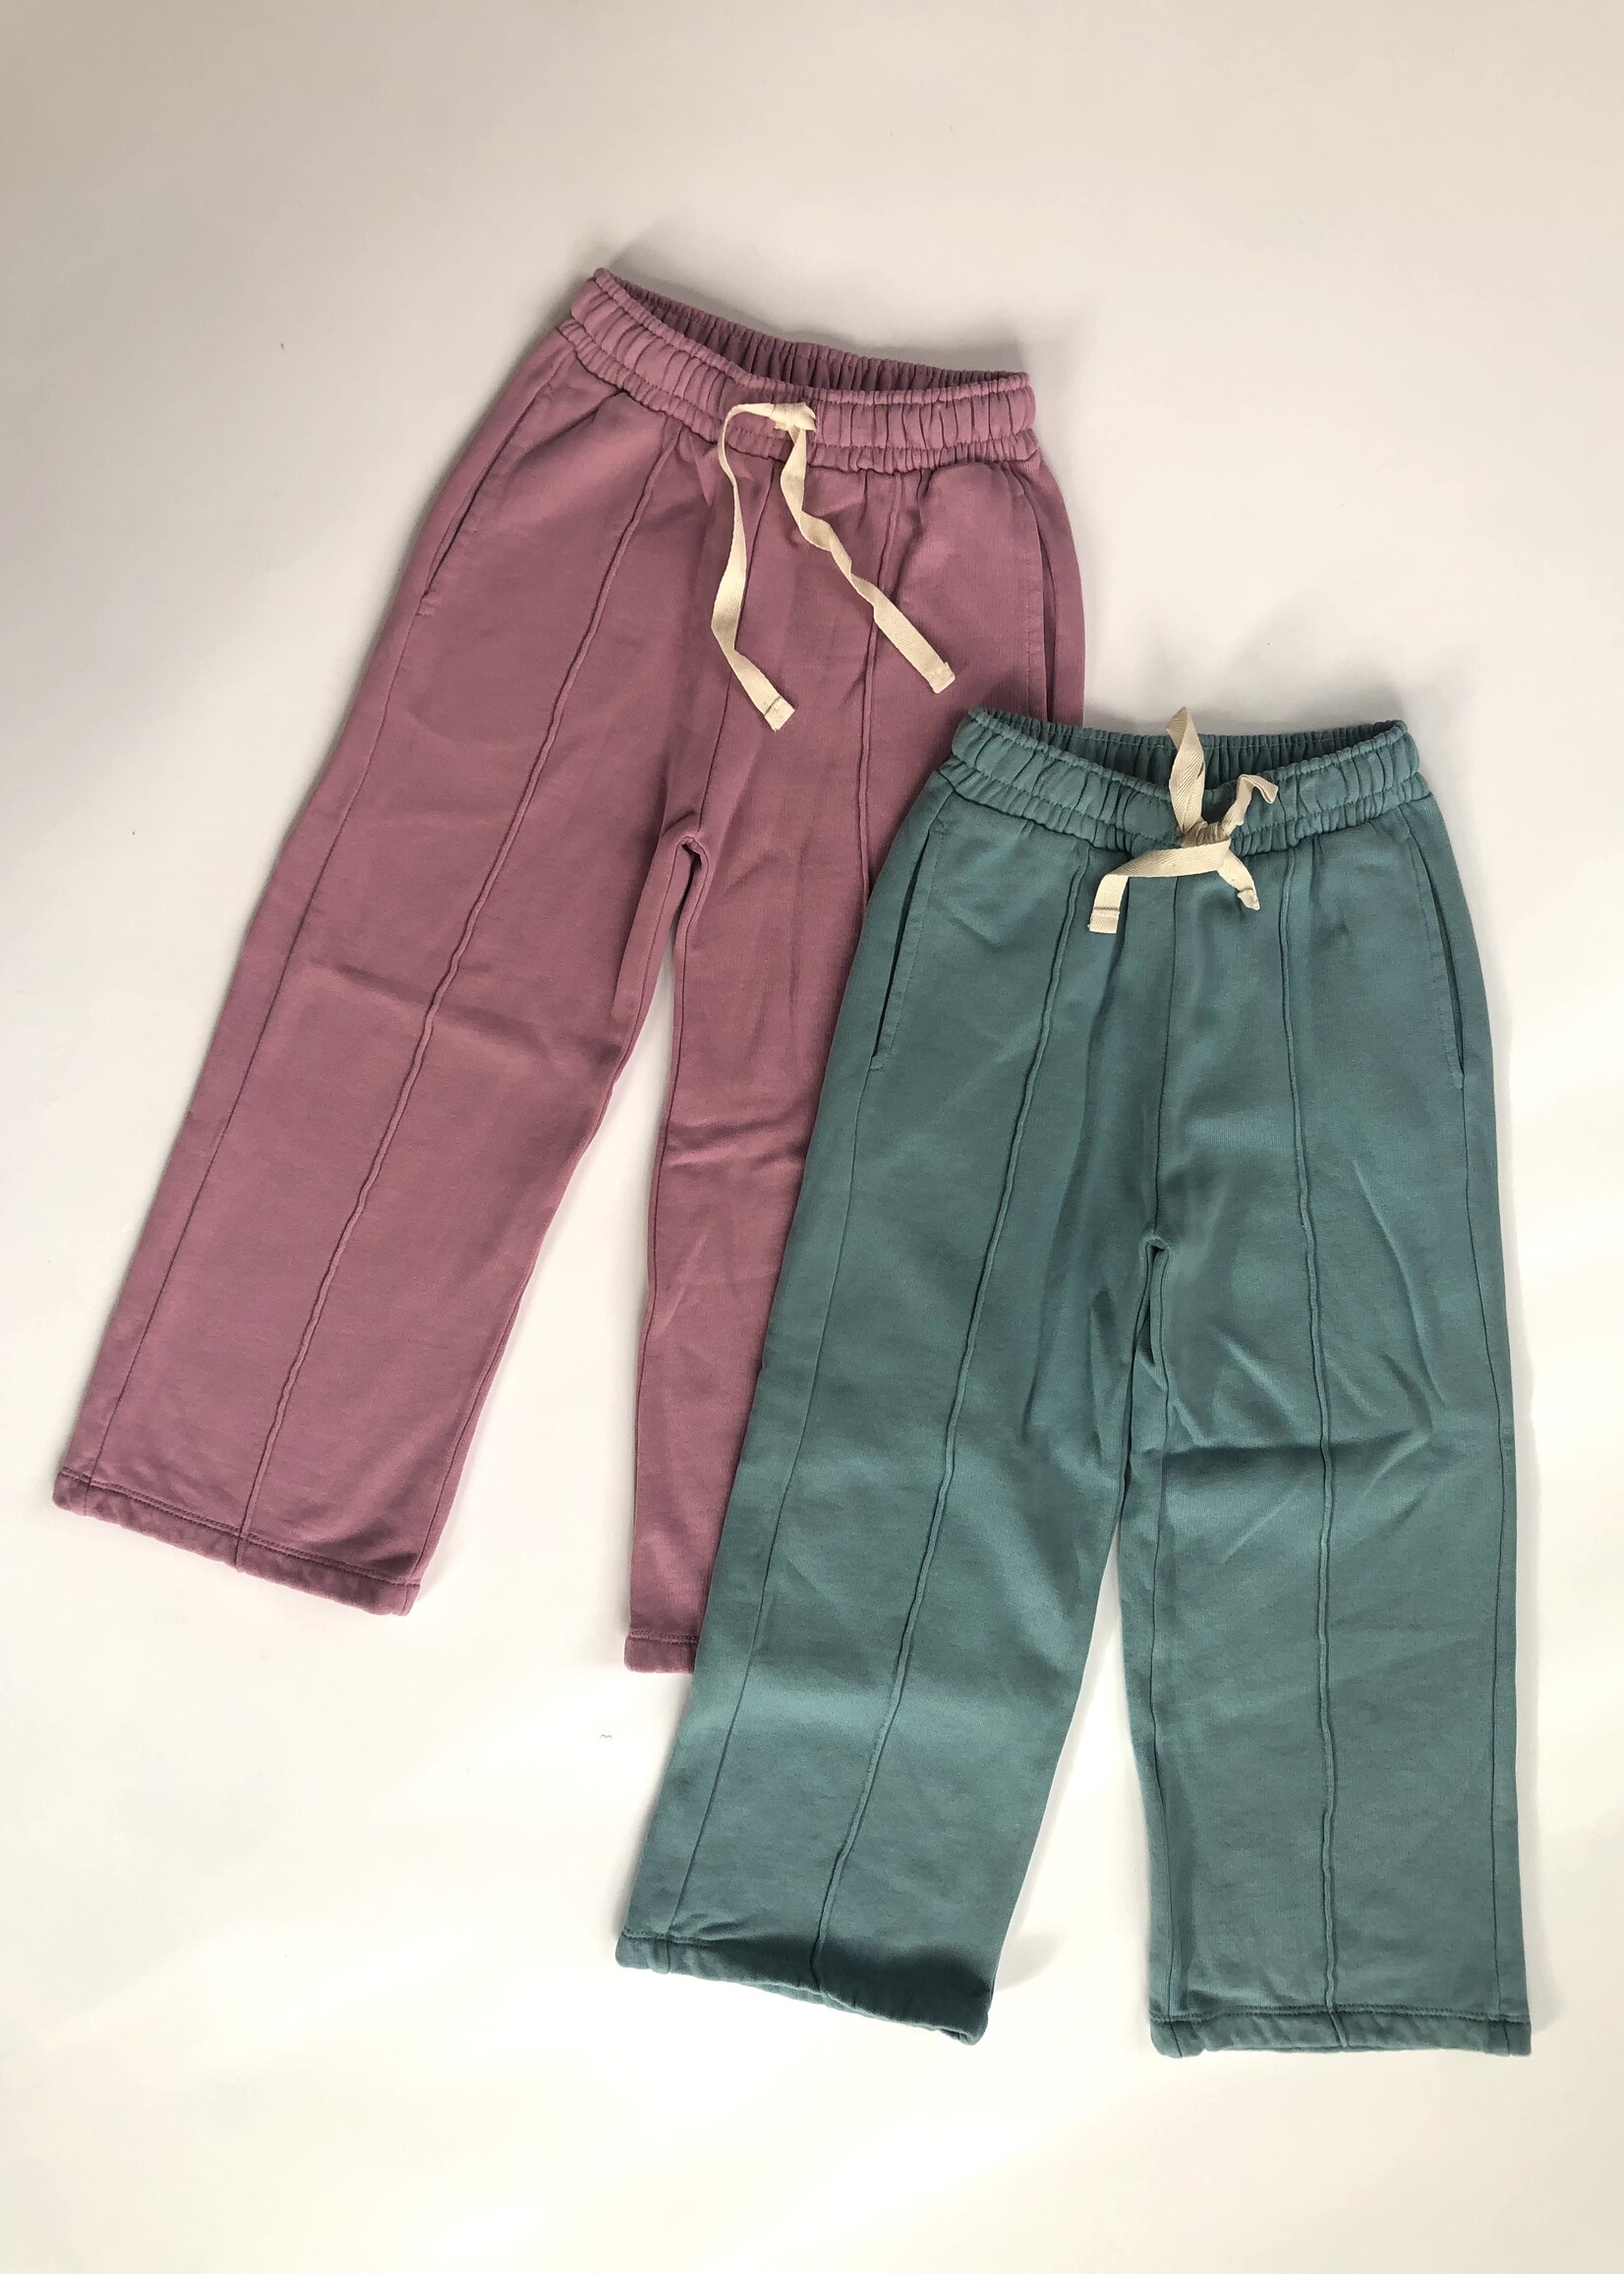 Long Live The Queen Lilac joggers pants 6y